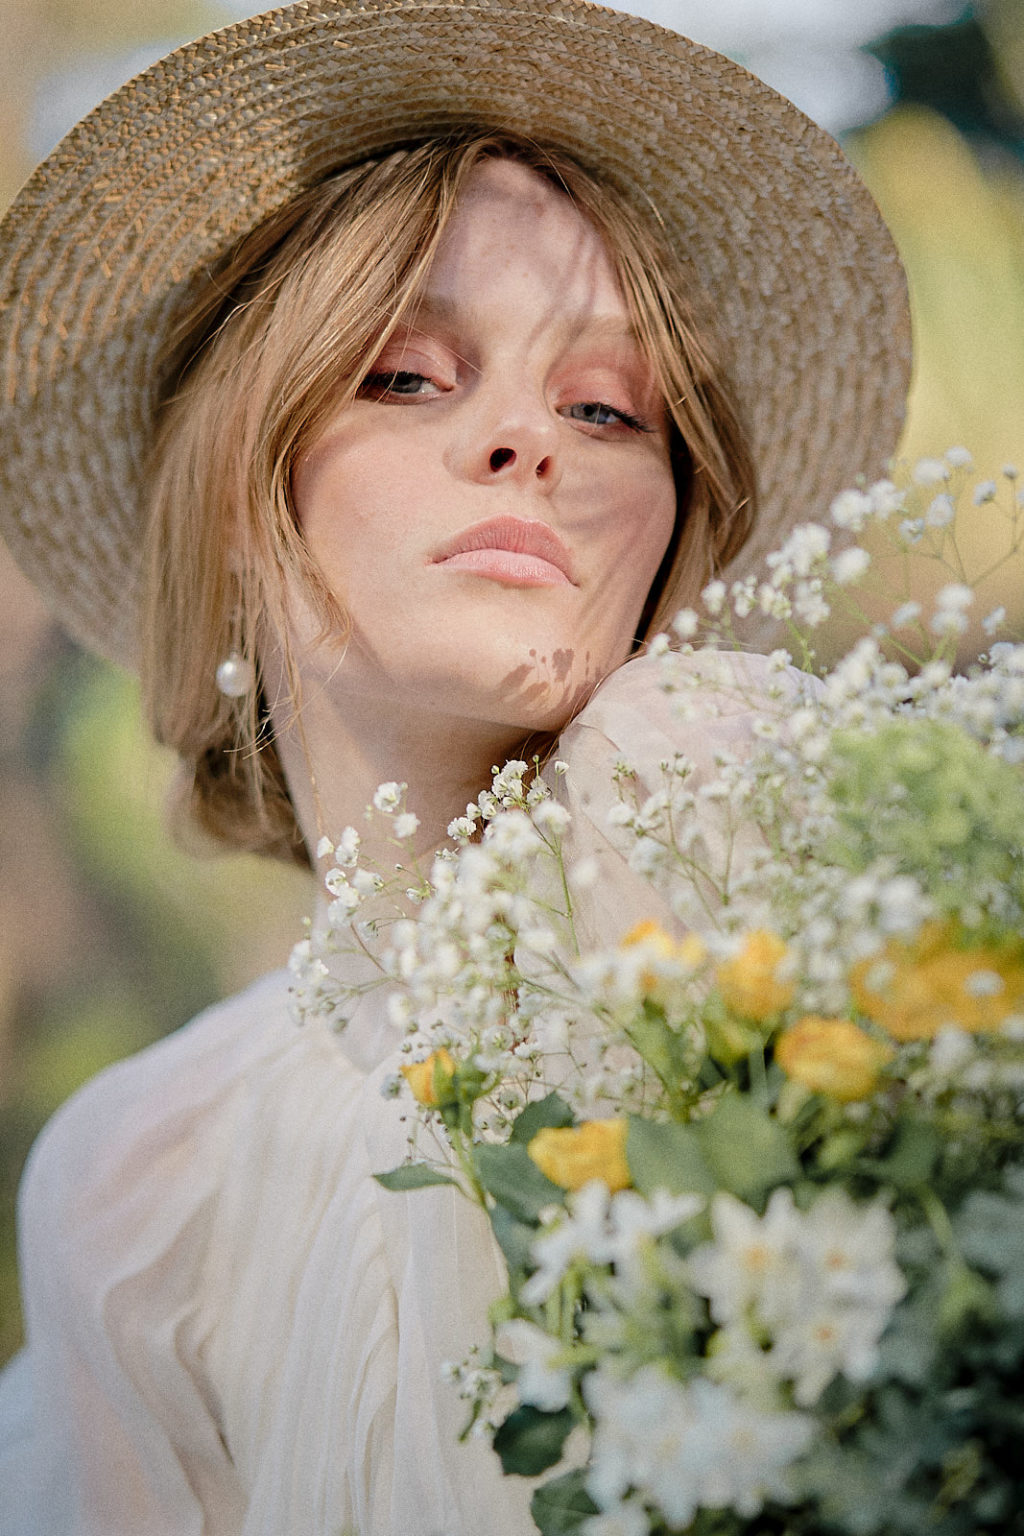 Luxury Picnic Wedding With Chic Victorian Inspiration